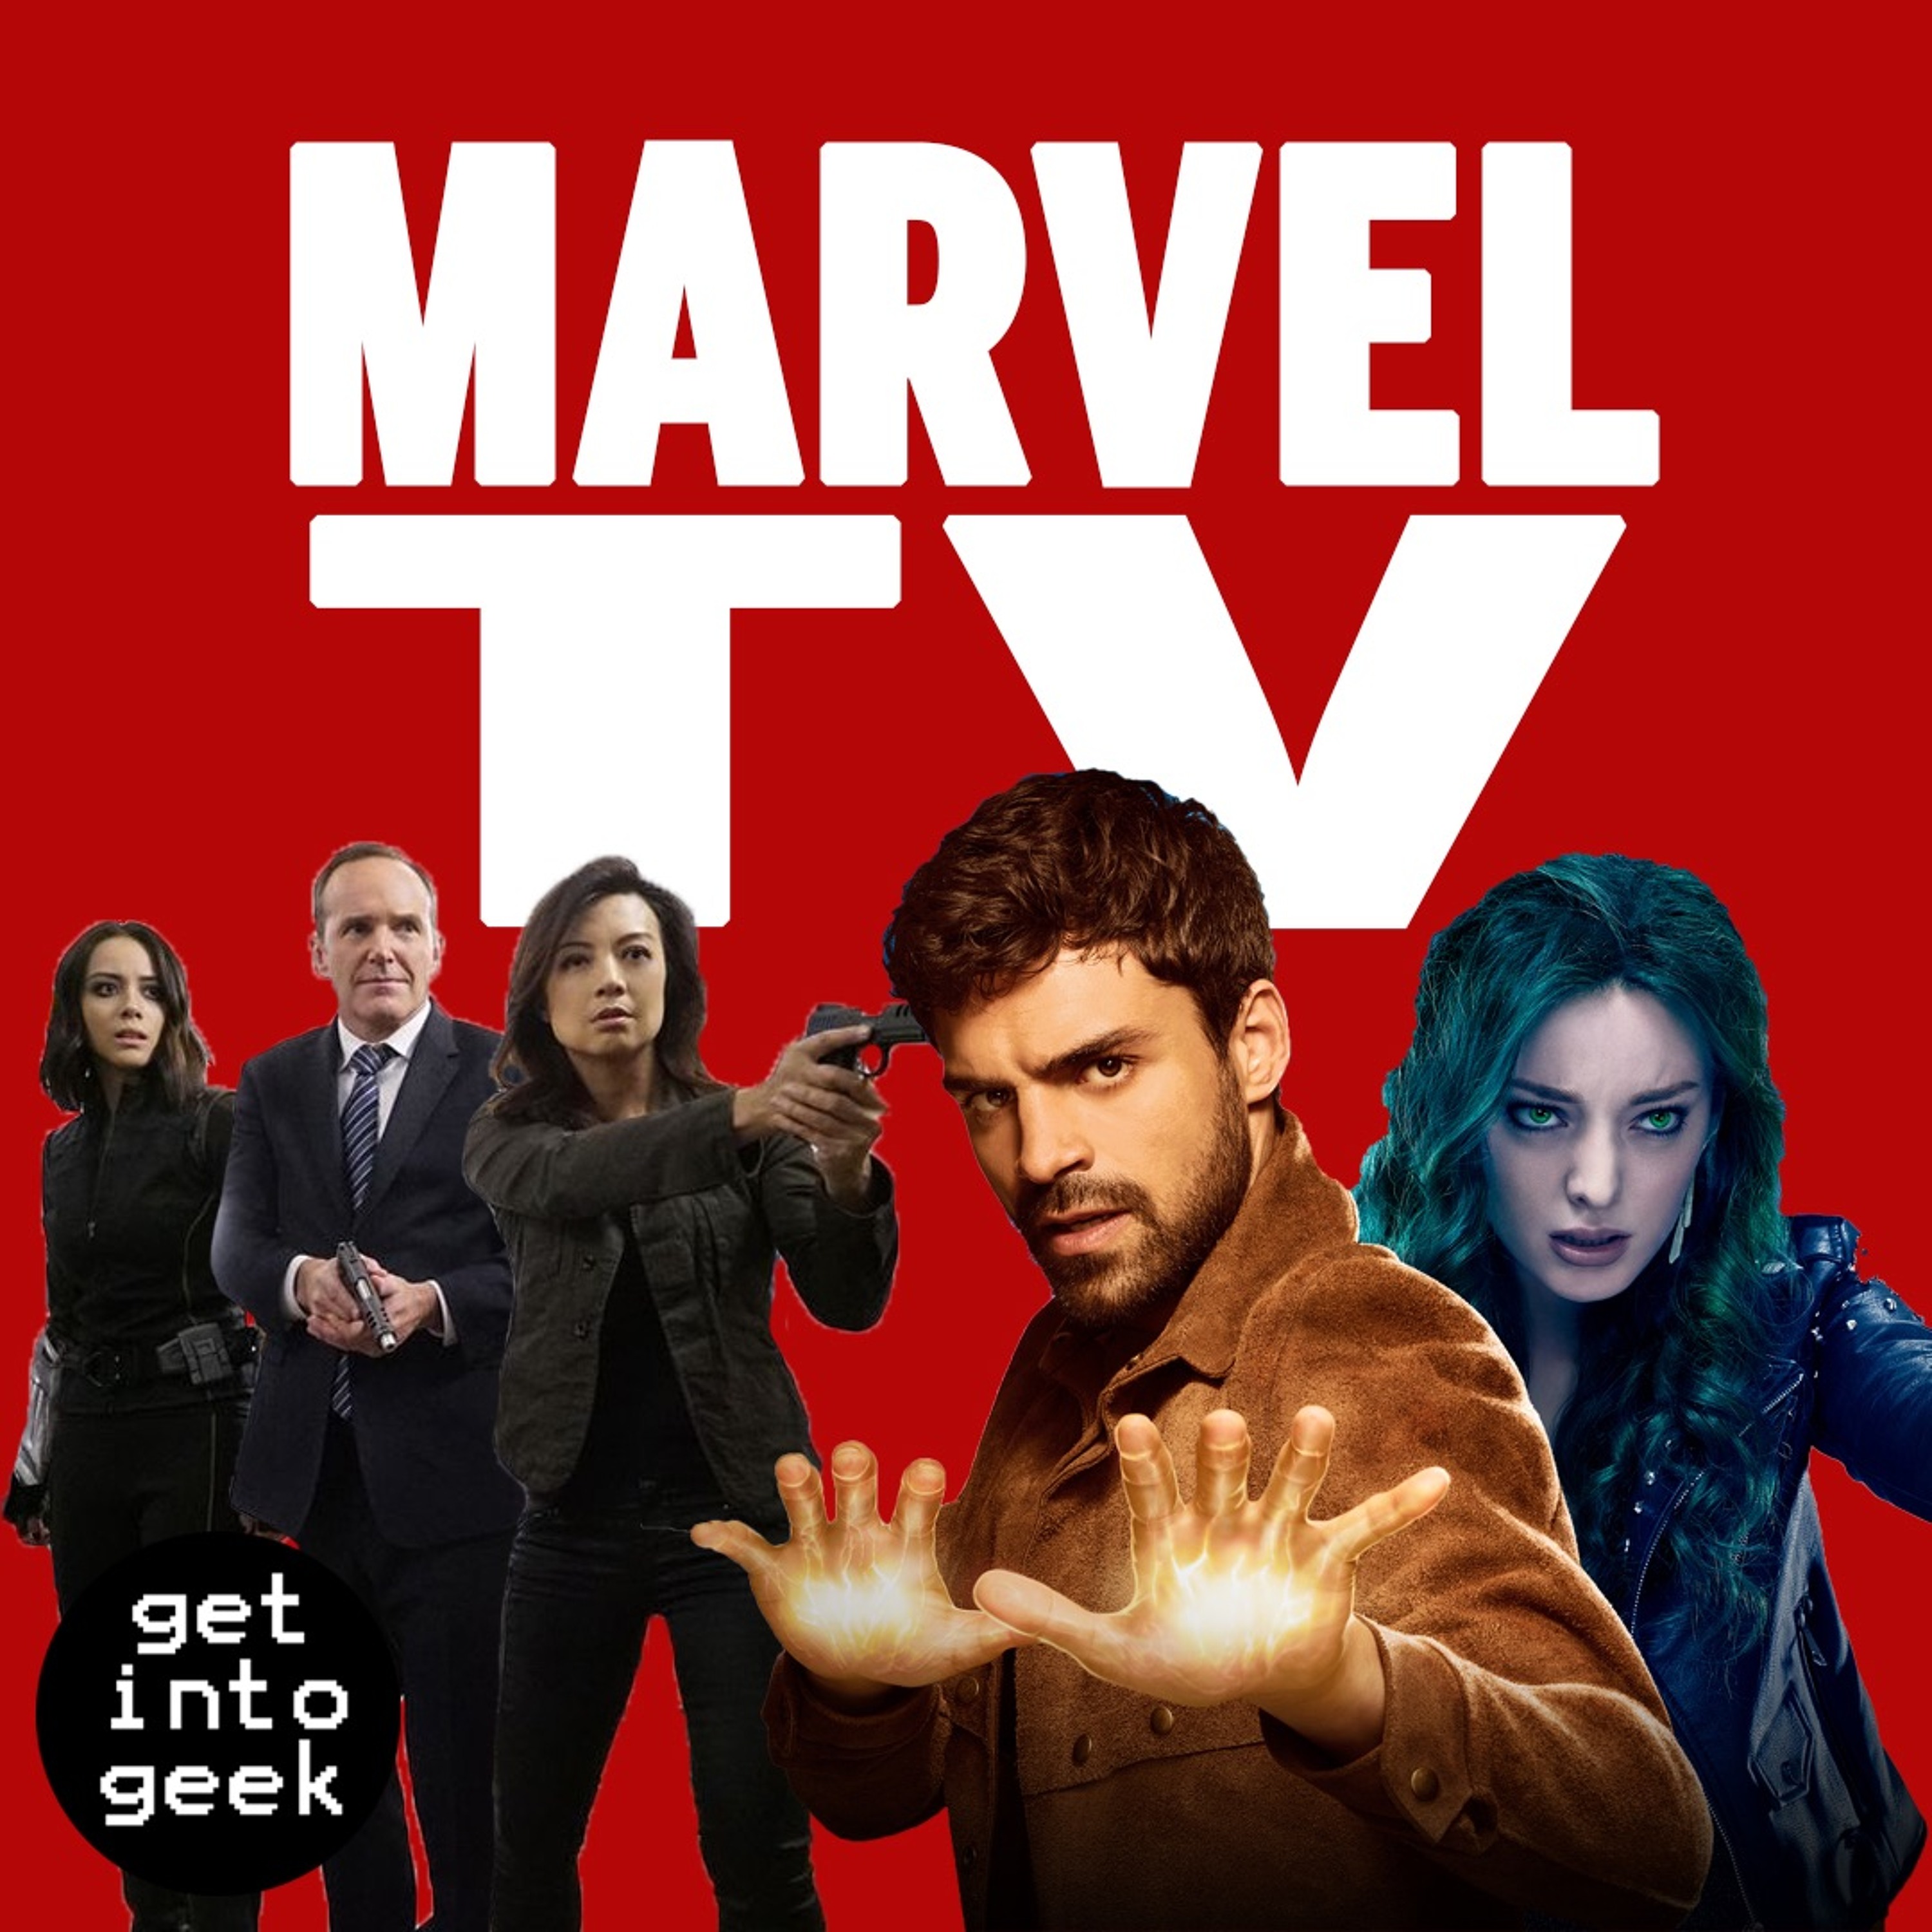 MARVEL TV: Episode 5 - S.H.I.E.L.D. 5.16 & The Gifted 1.11